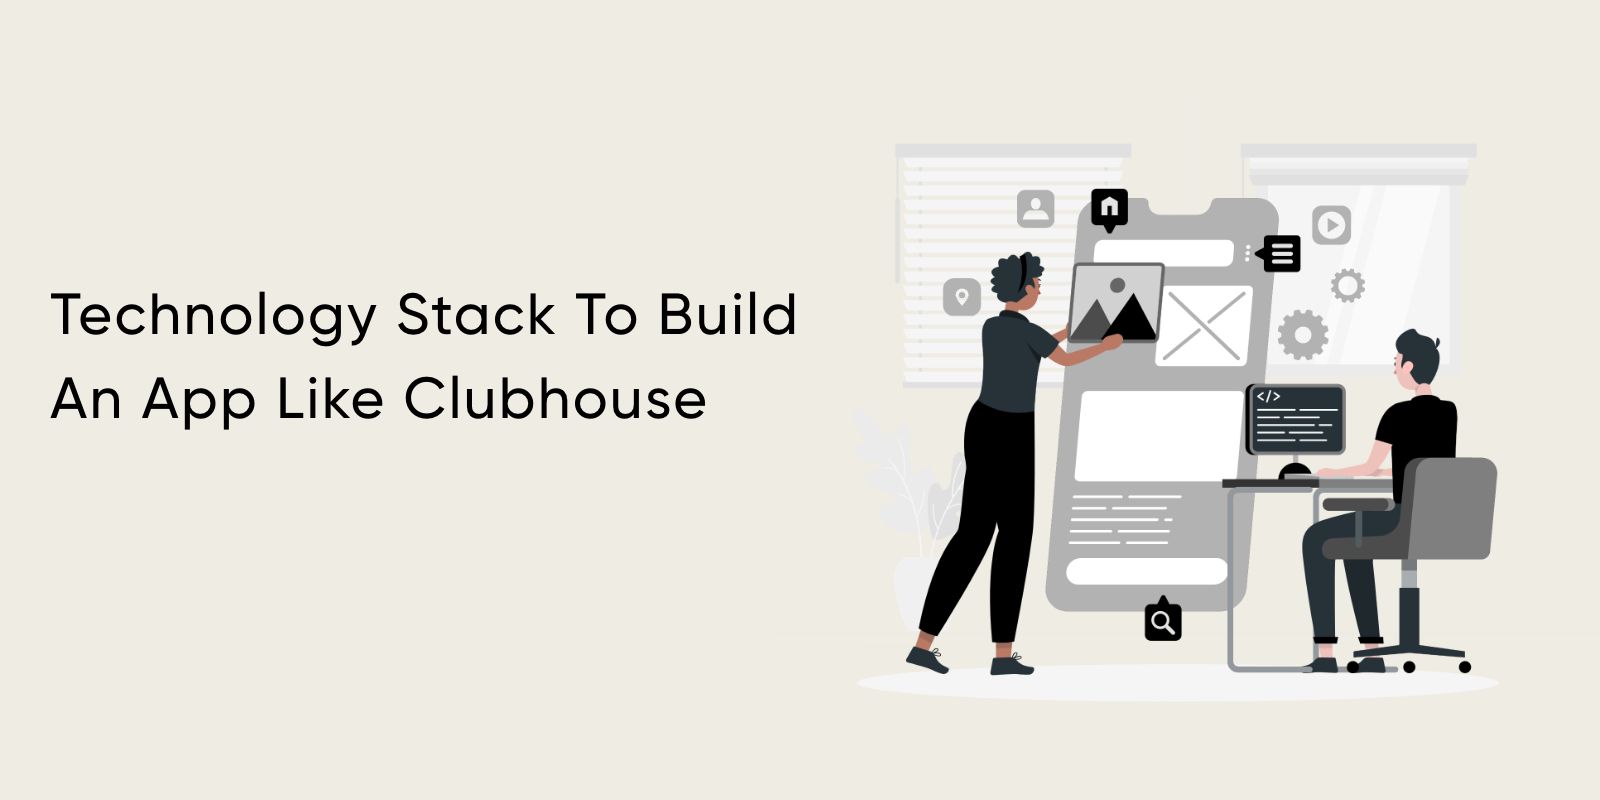 tech stacks for app development like clubhouse